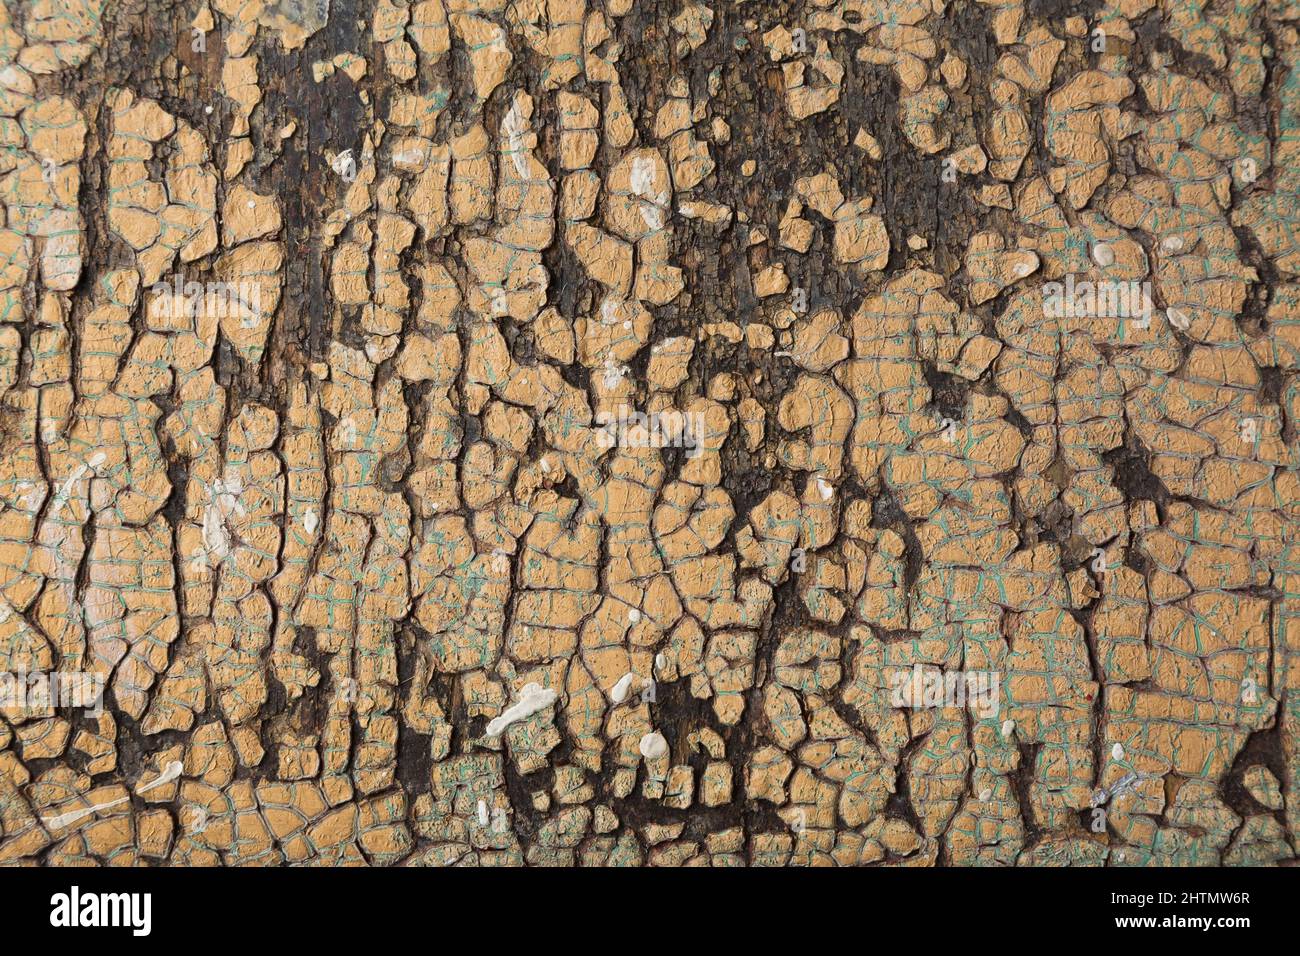 Wooden surface with cracked, peeling and fading tan and blue paint. Stock Photo